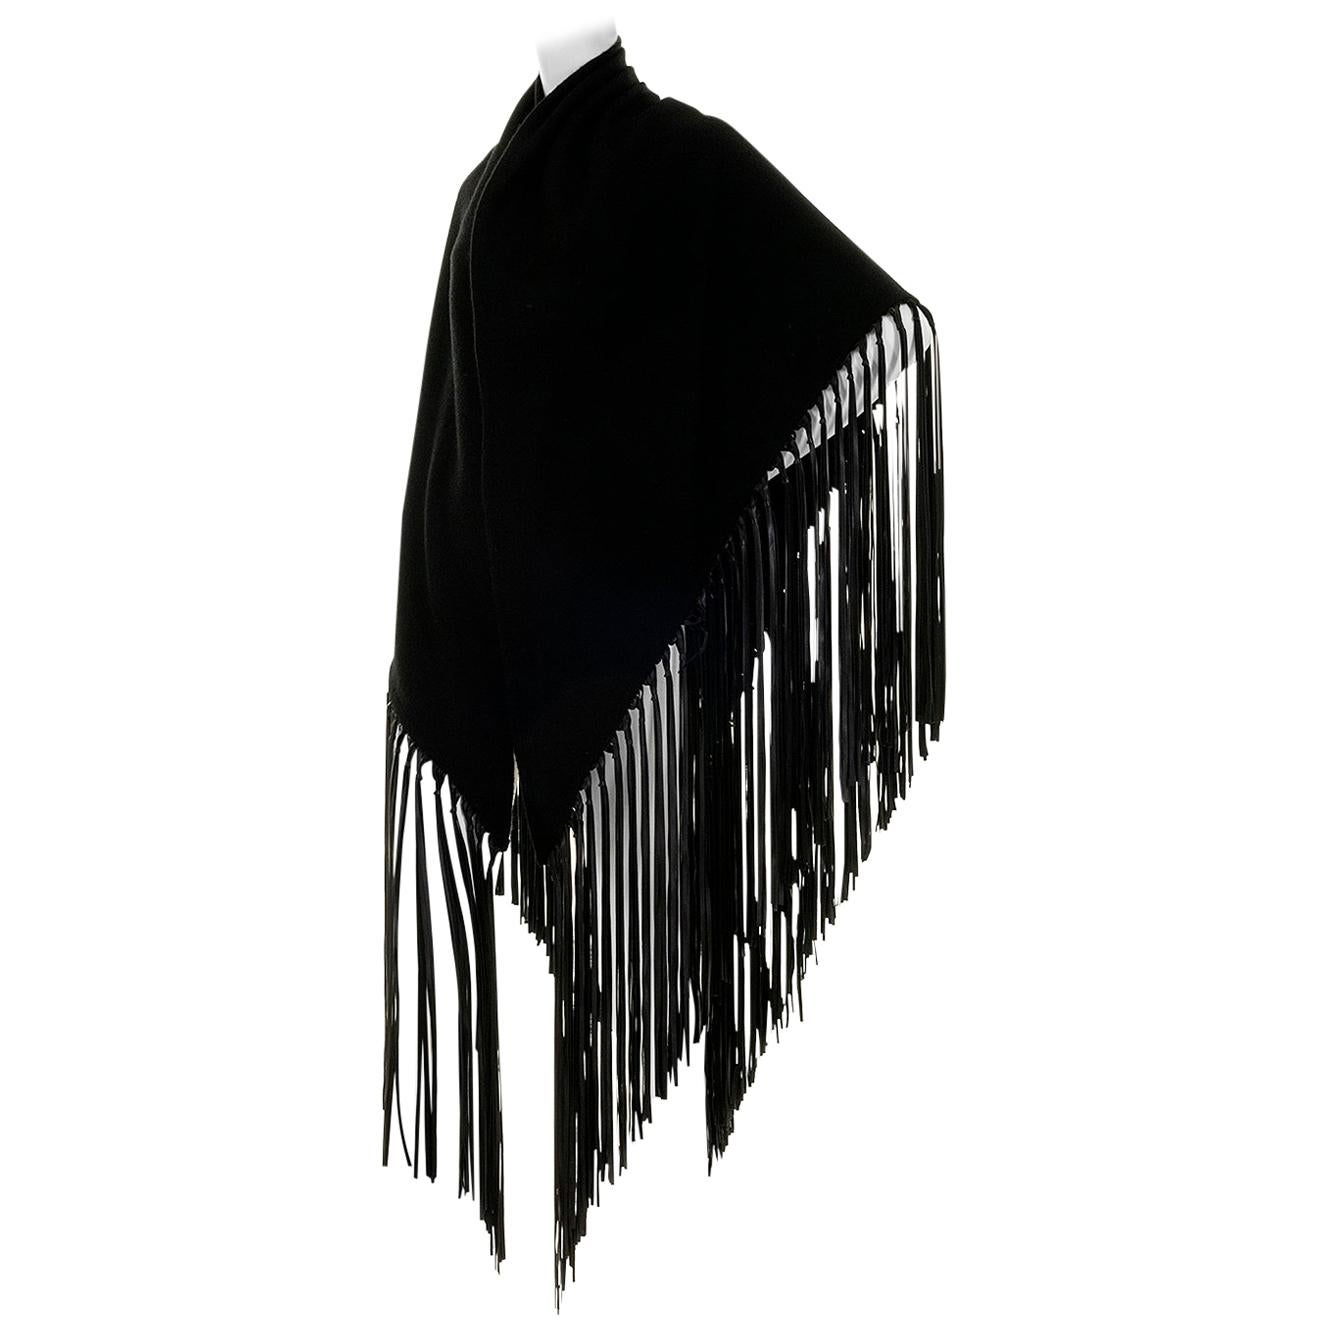 Tres Chic Hermes Black Cashmere & Wool Shawl Trimmed with Leather Tassel Fringe